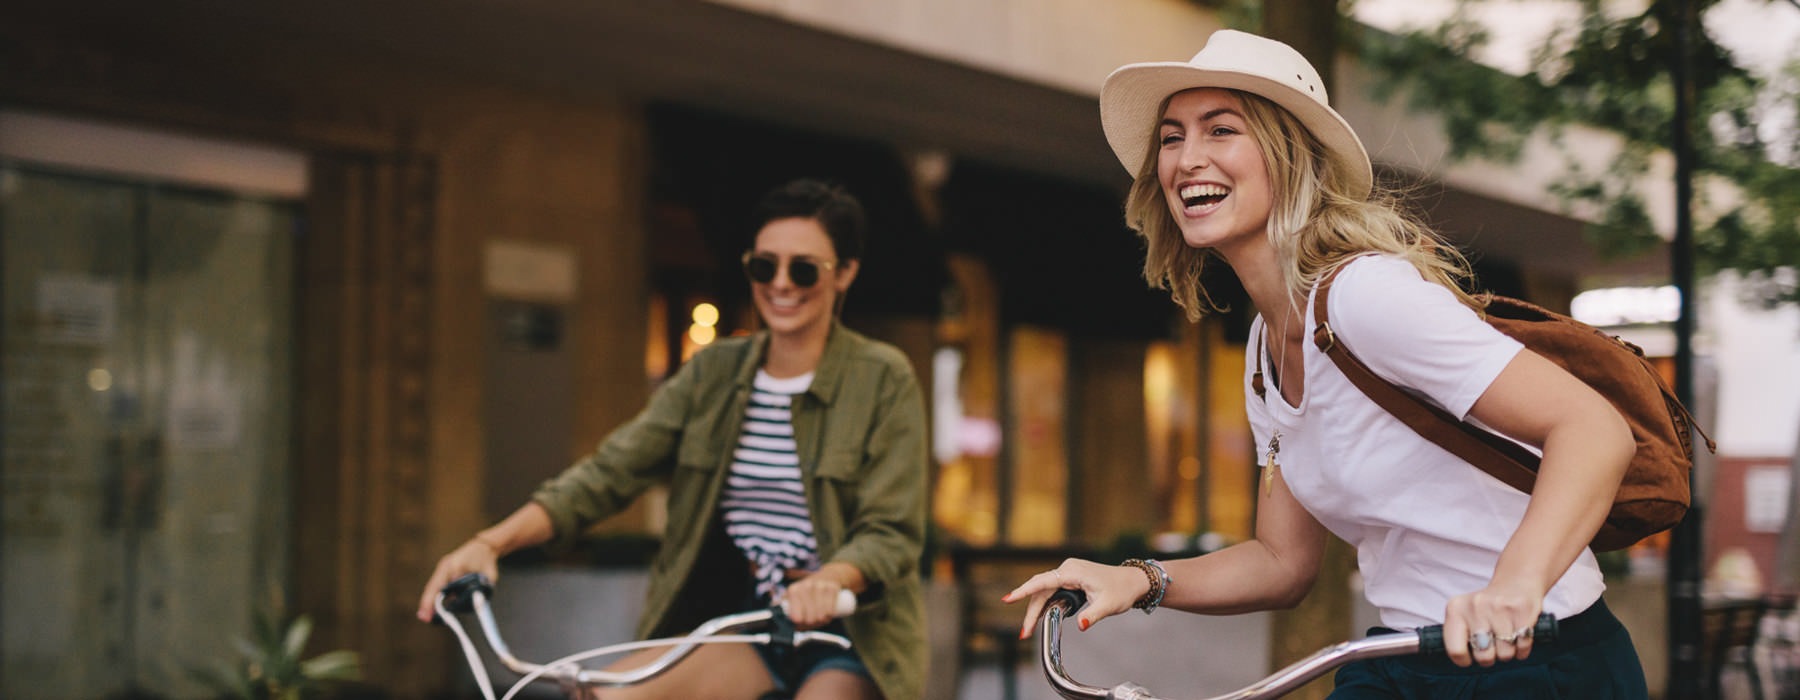 two young women smile as they ride bicycles down a city sidewalk